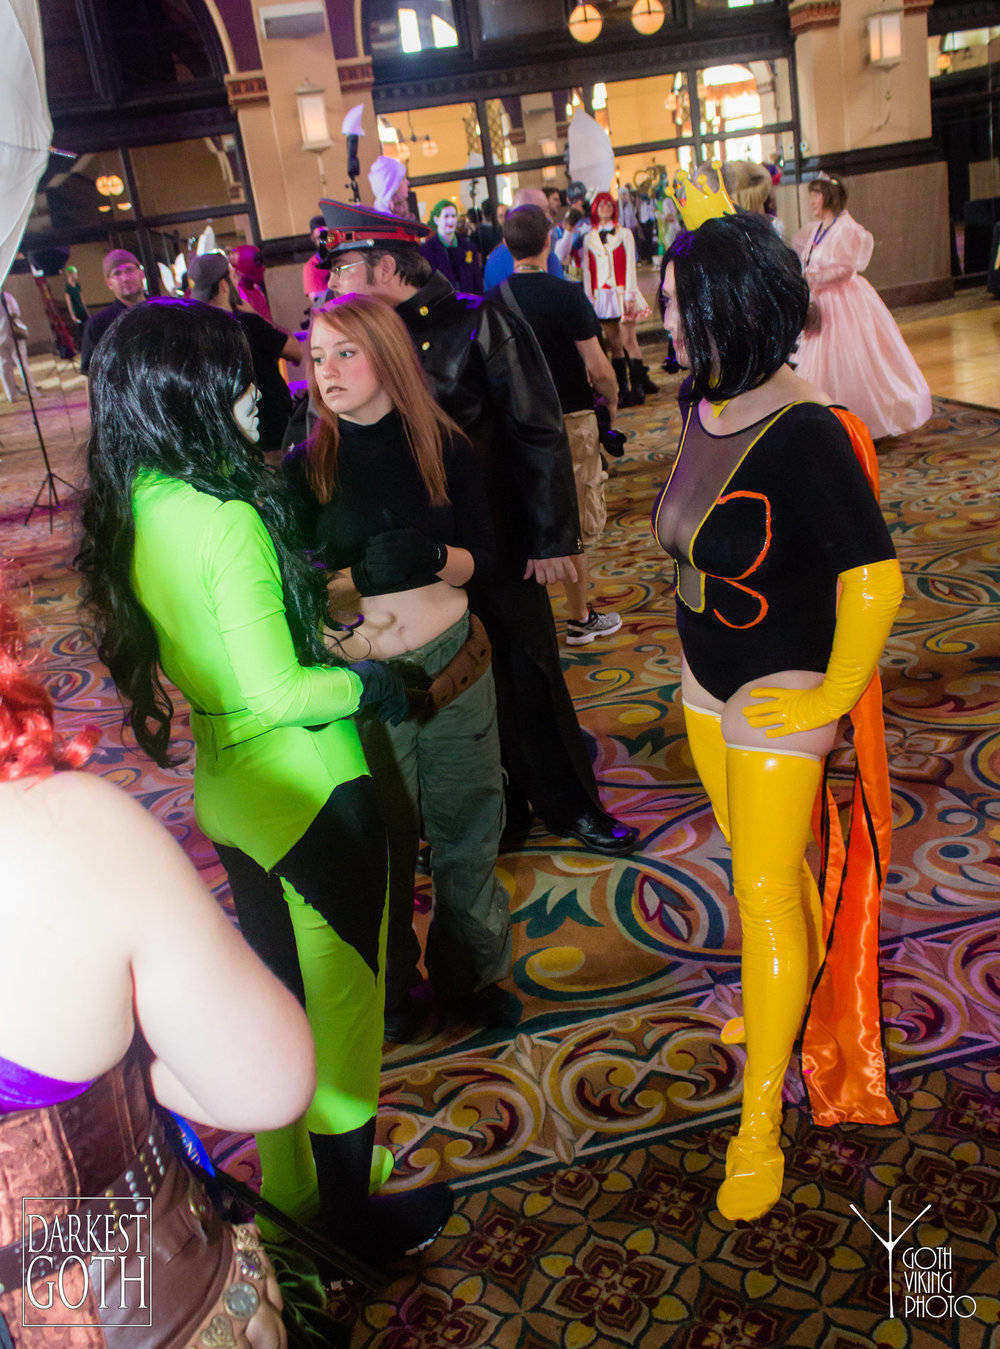 Kim Possible and Sheego! Had a total geekout moment seeing them.